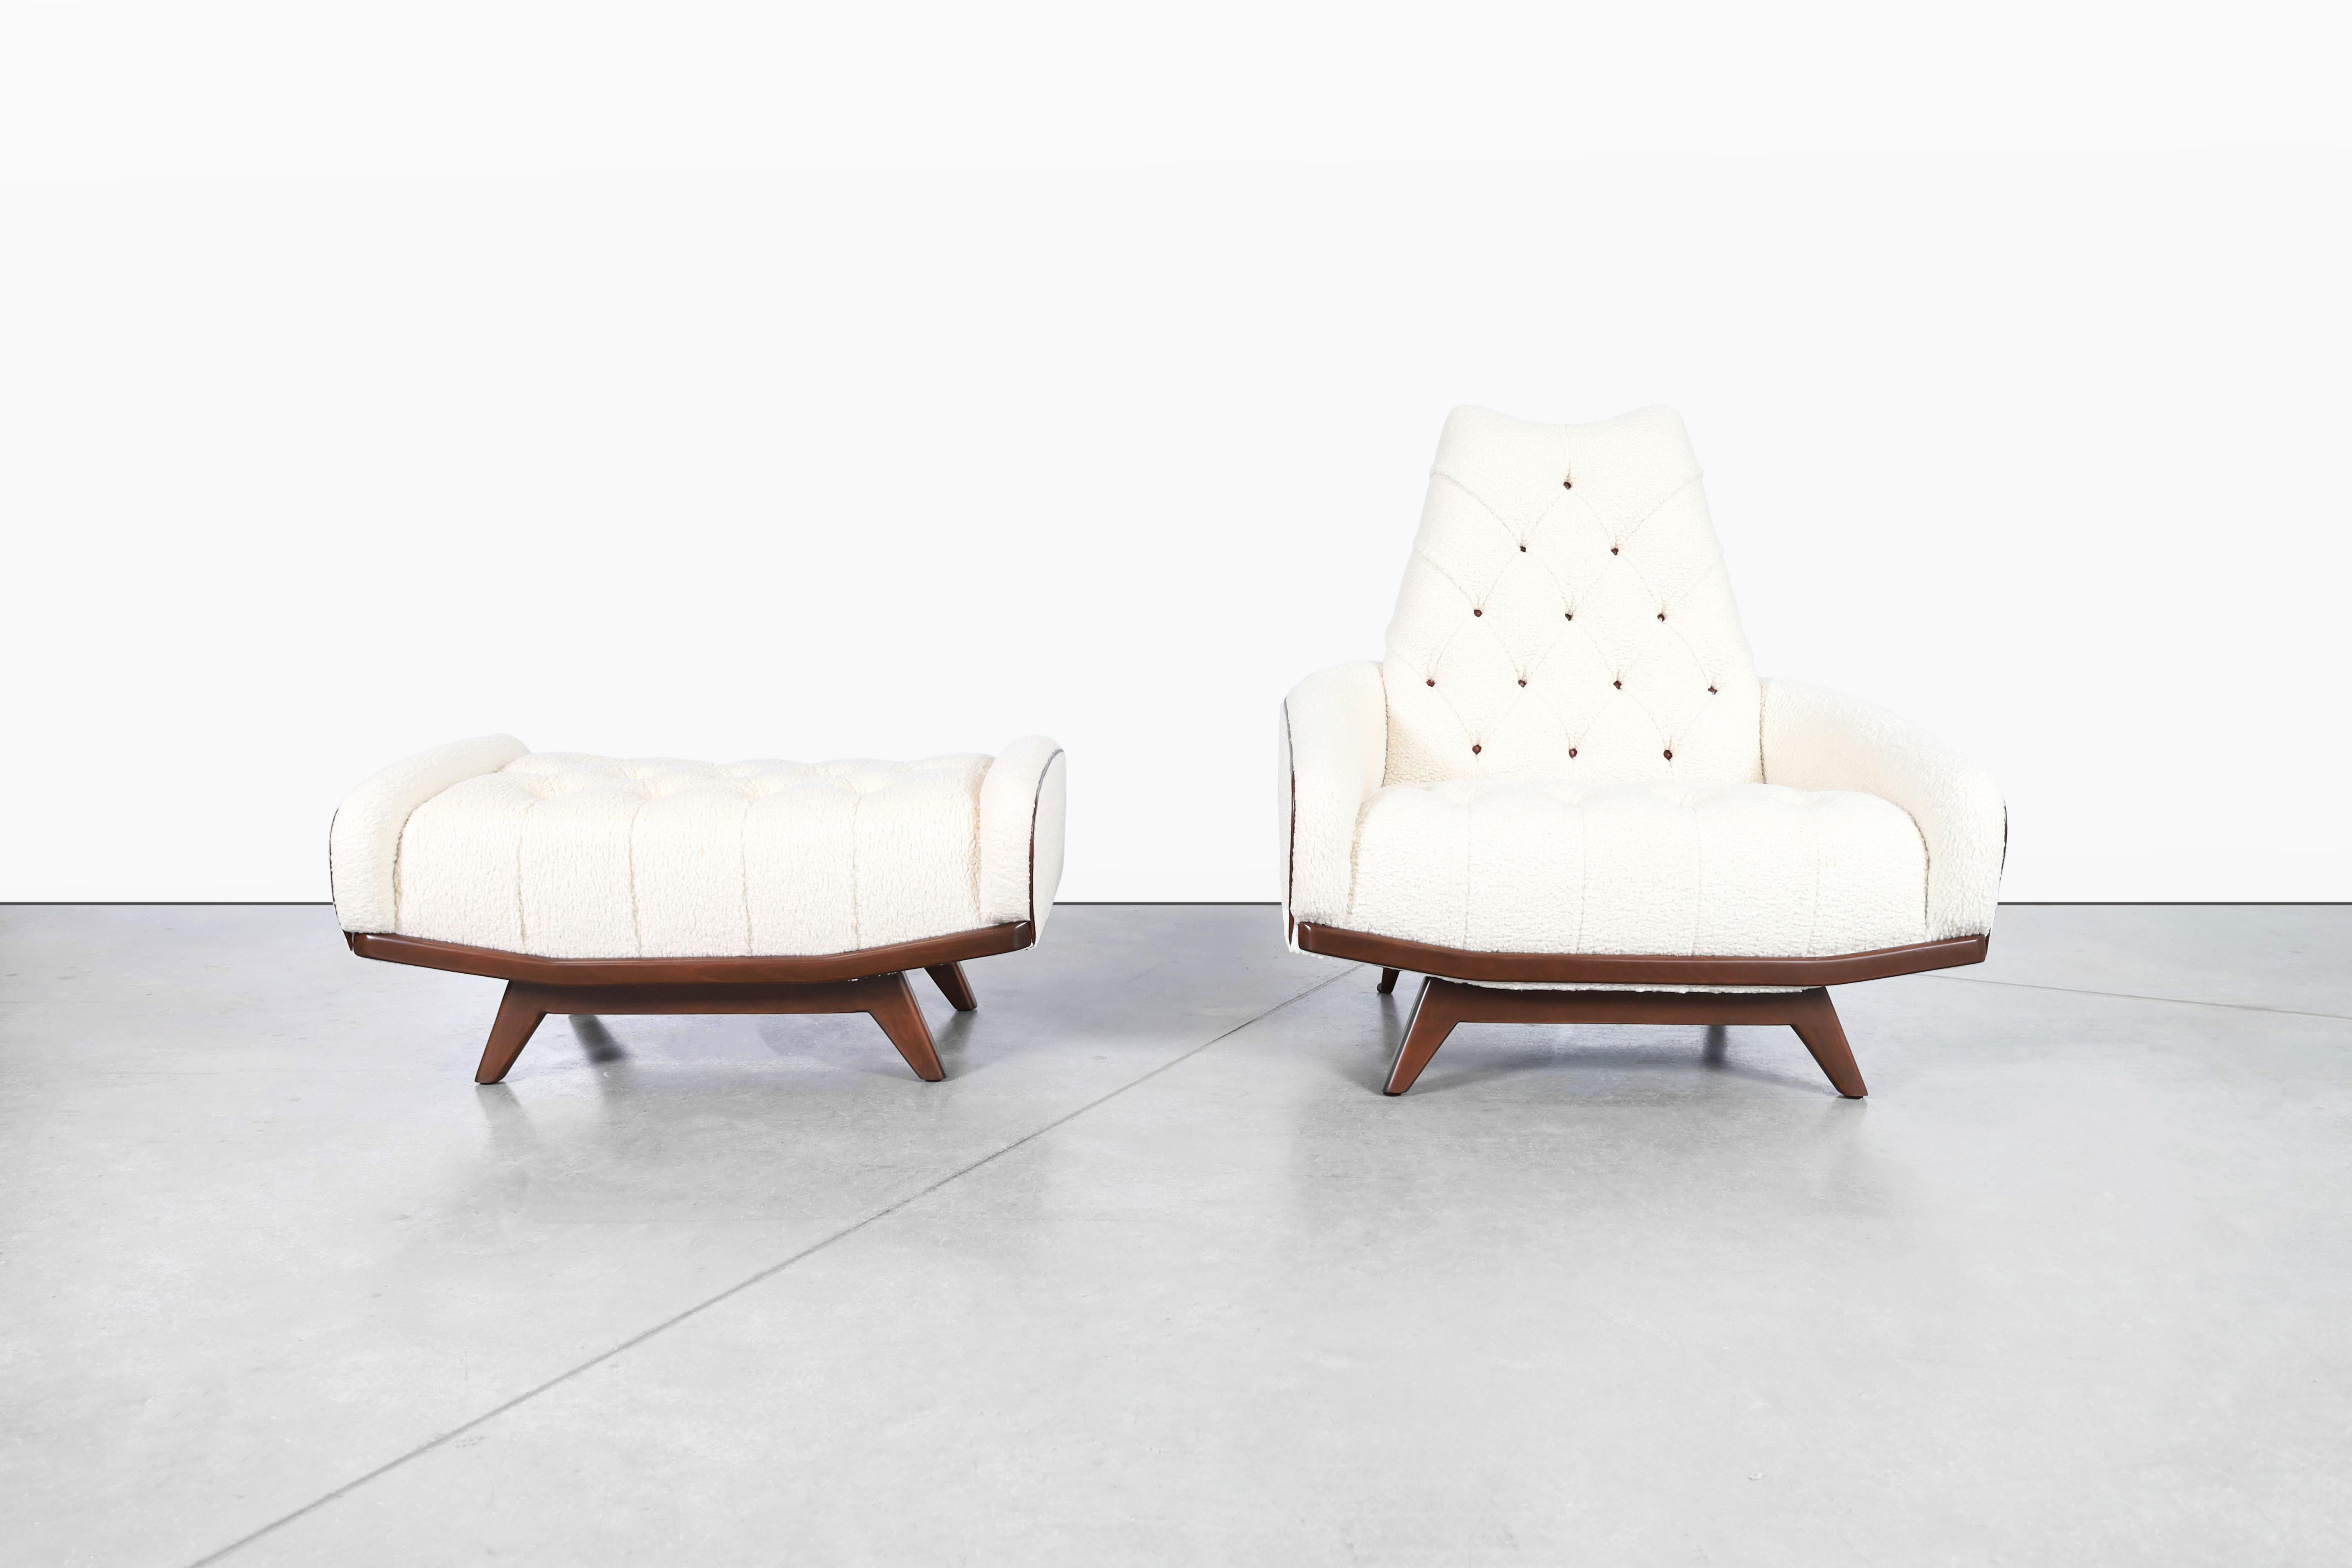 Beautiful vintage walnut “Gondola” lounge chair and ottoman attributed to Adrian Pearsall, designed in USA circa 1950s. Both the chair and the ottoman have a representative design of the mid-century era, where the elegant lines that make up the